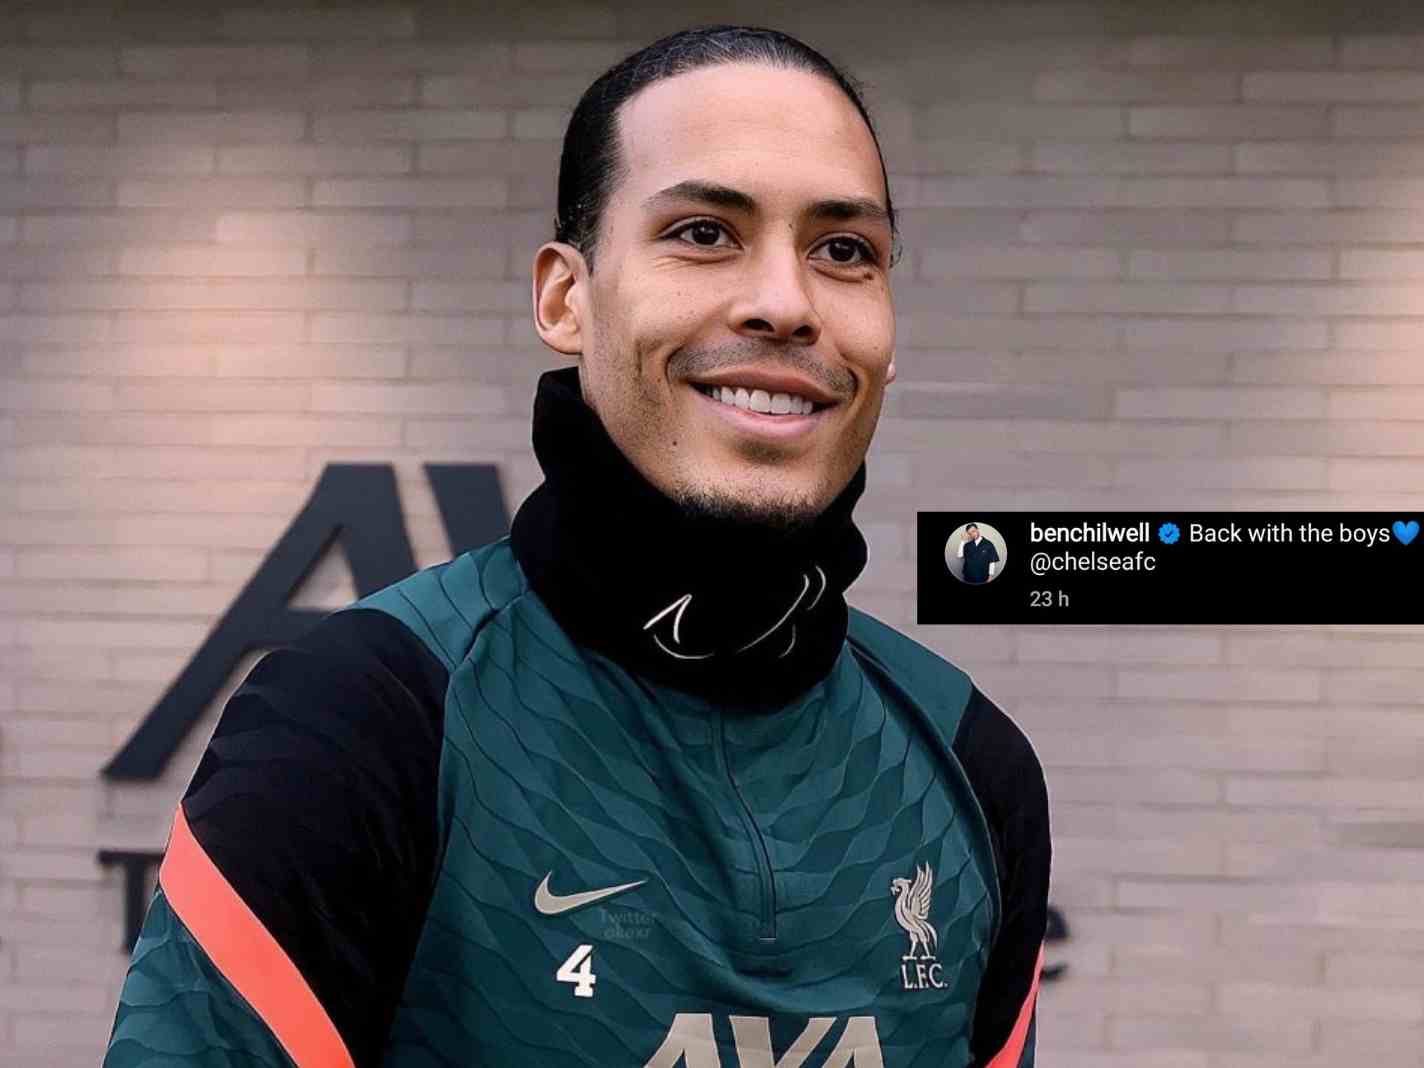 The photo shows Virgil van Dijk with a smile on his face in Liverpool training along with a screenshot of Ben Chilwell's Instagram post.